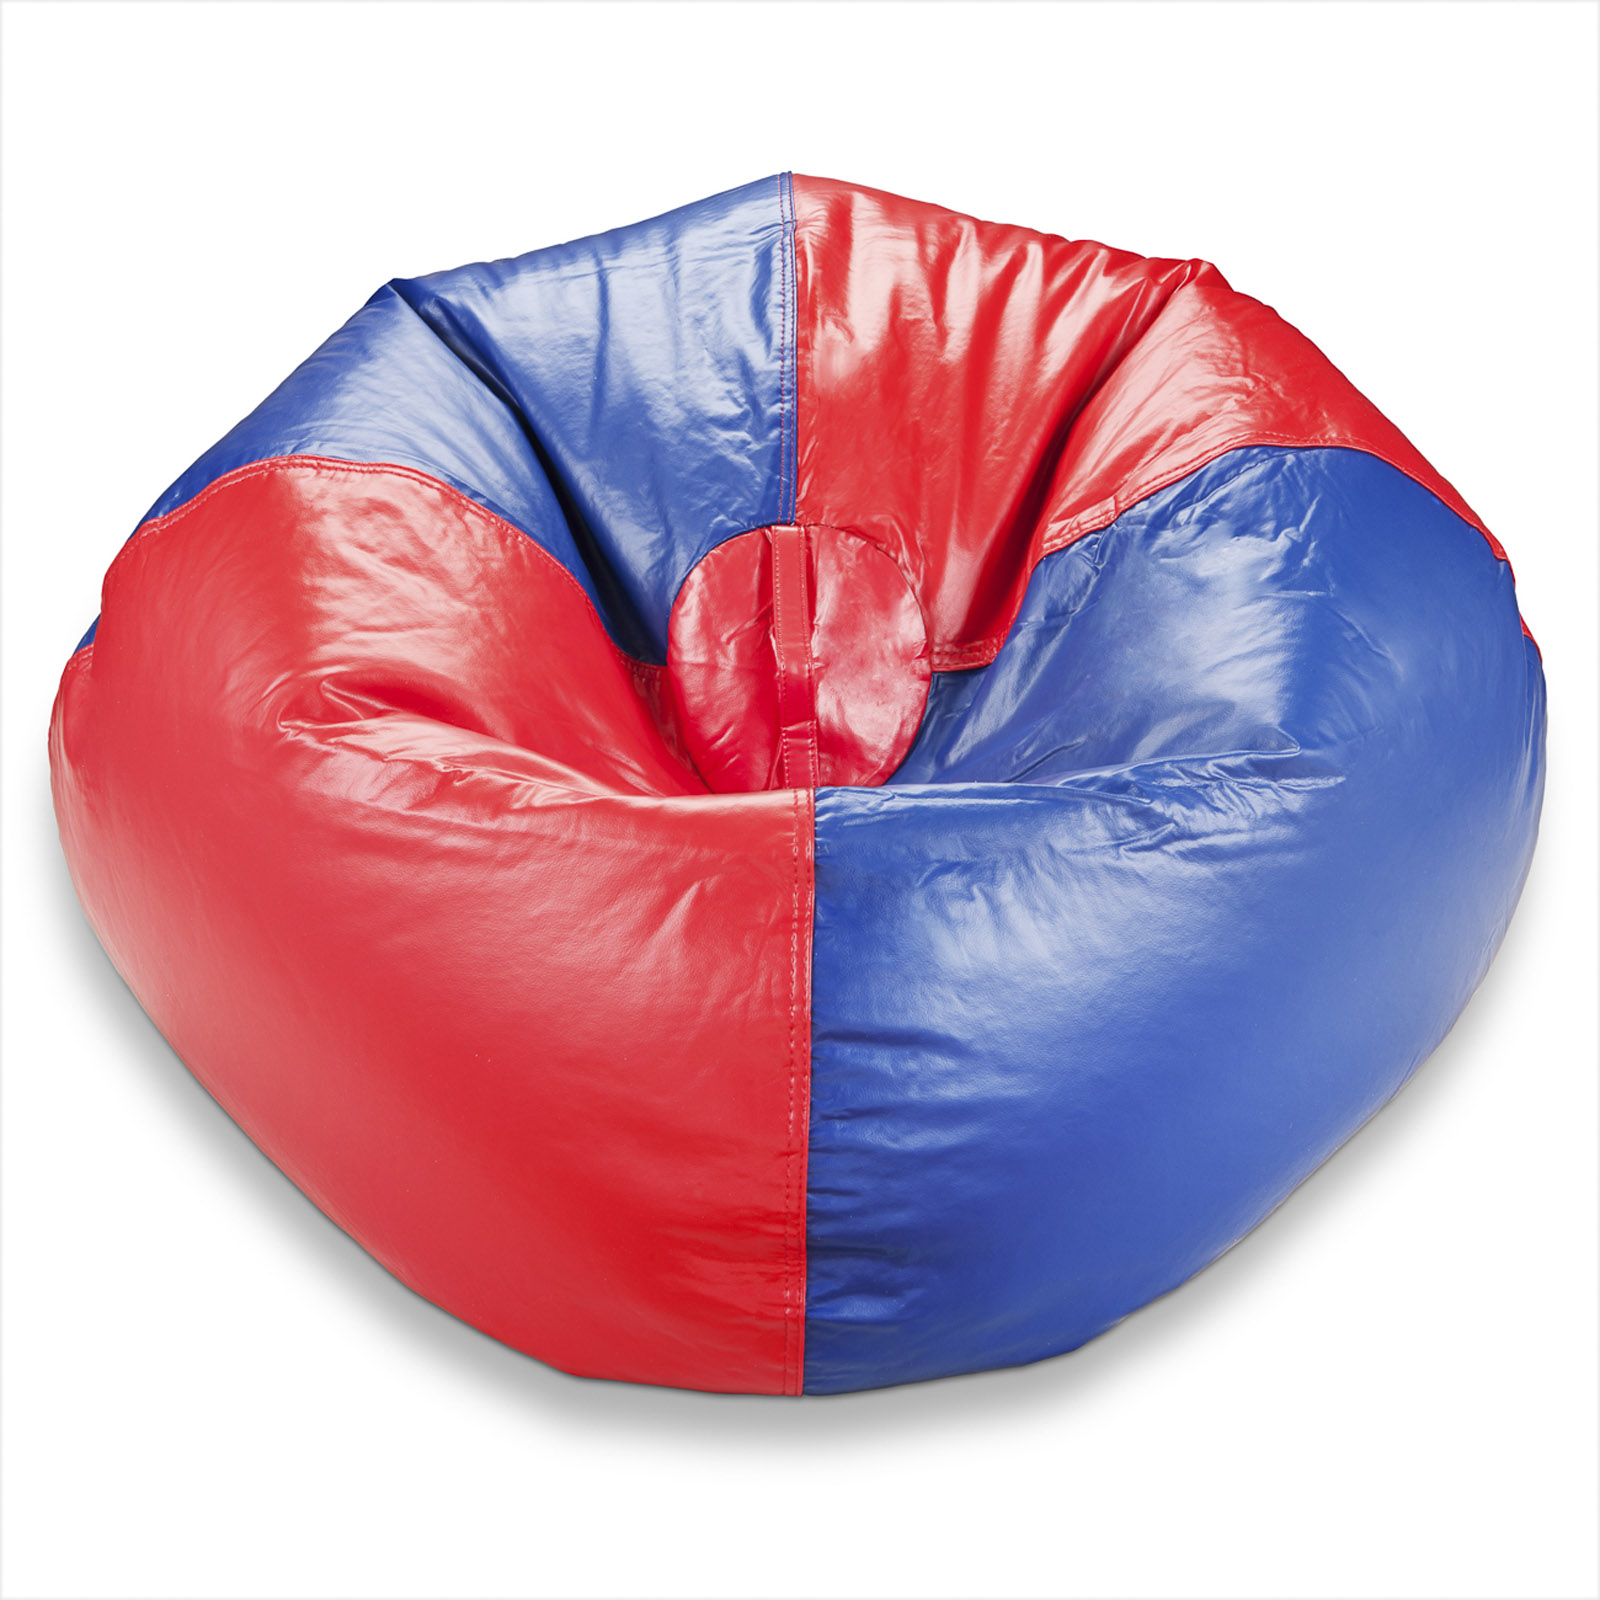 Blue/Red Bean Bag Chair Trendy and Fun Seating at Kmart